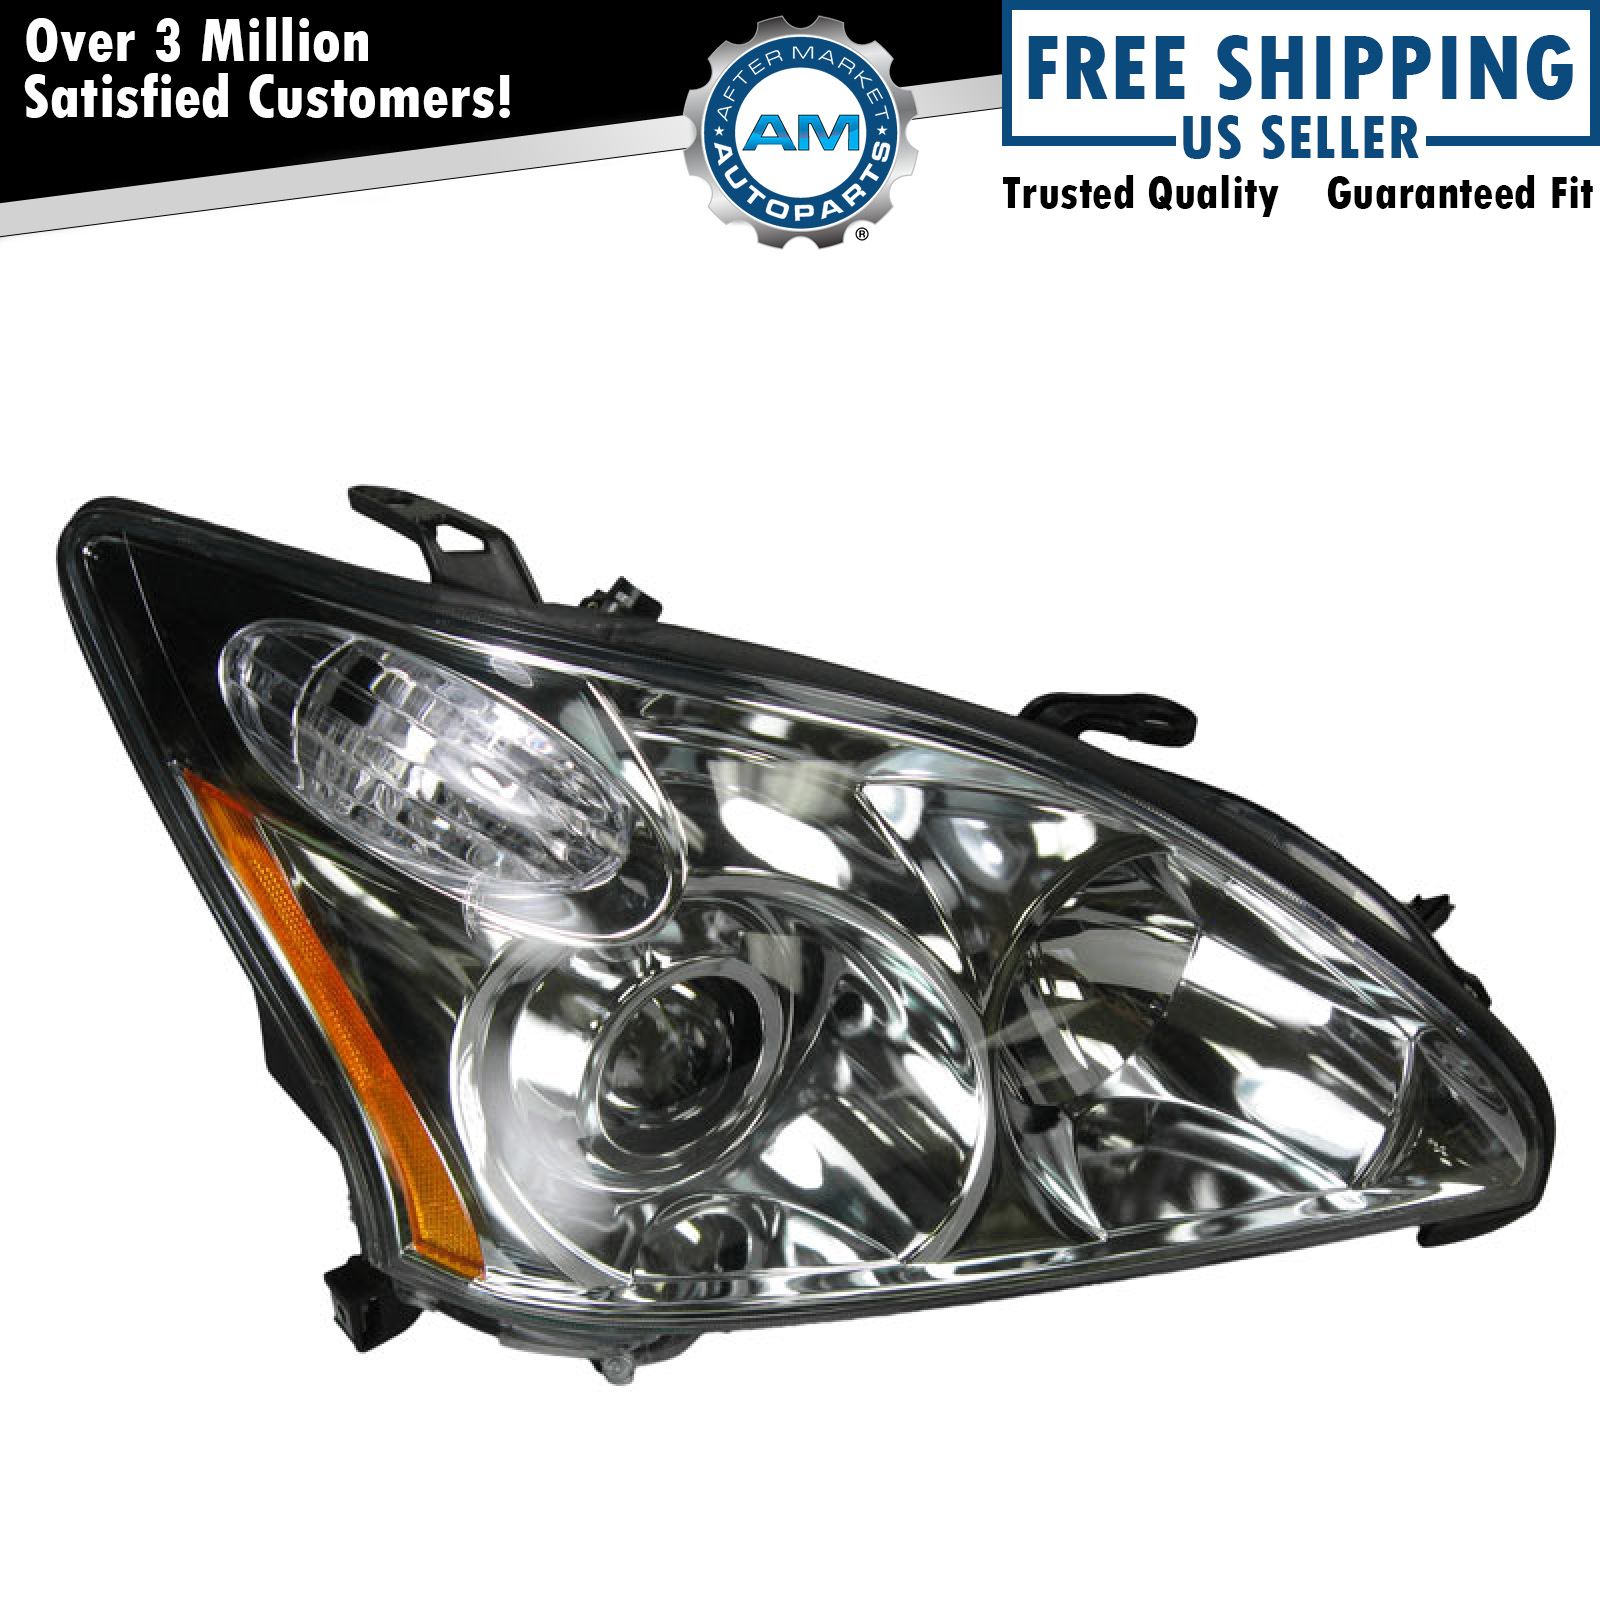 Right Headlight Assembly Passenger Side For 2004-2006 Lexus RX330 LX2503122